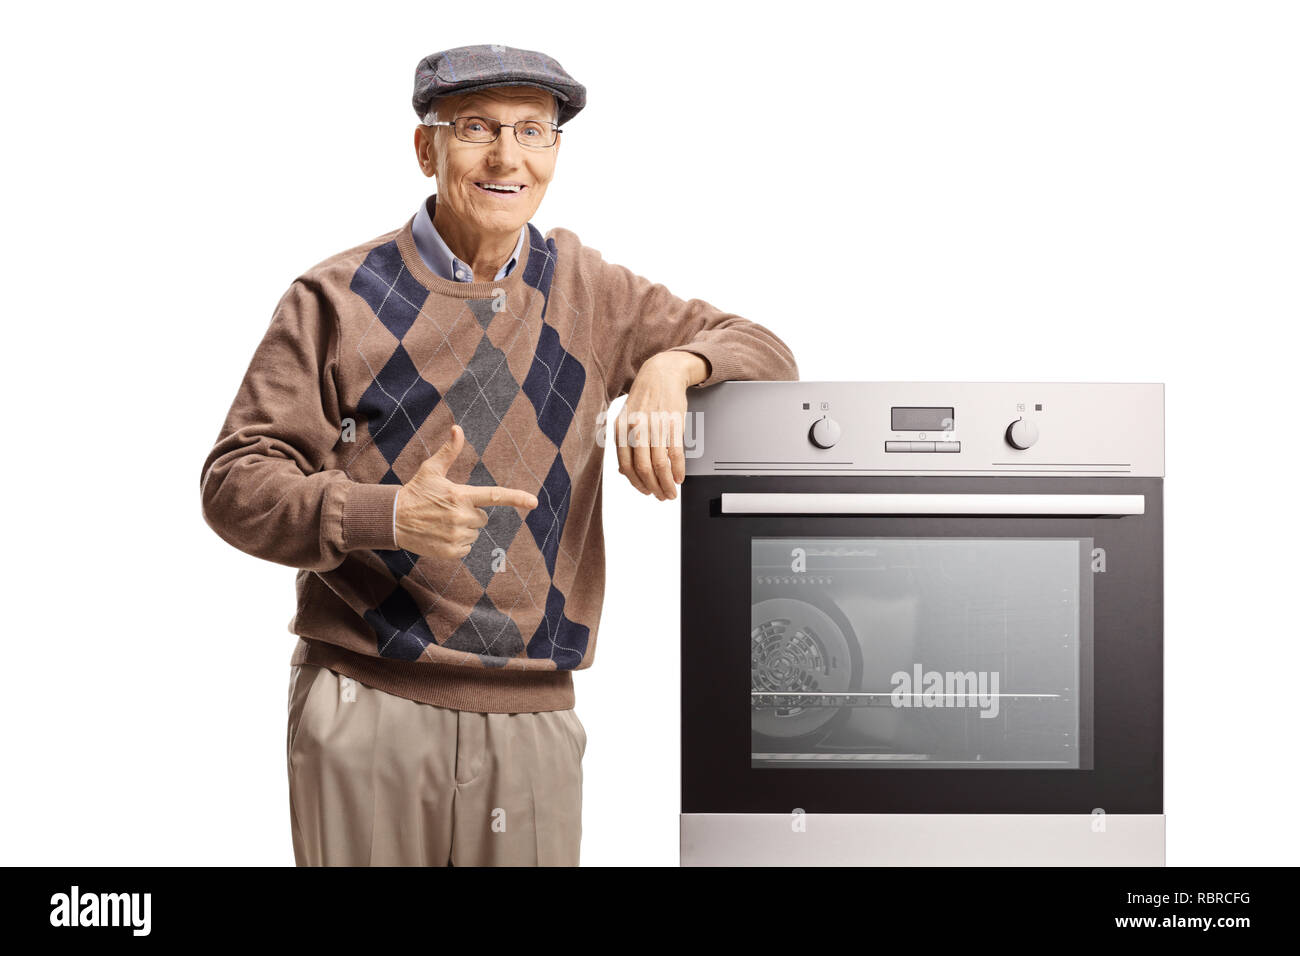 Electric cooker Cut Out Stock Images & Pictures - Alamy